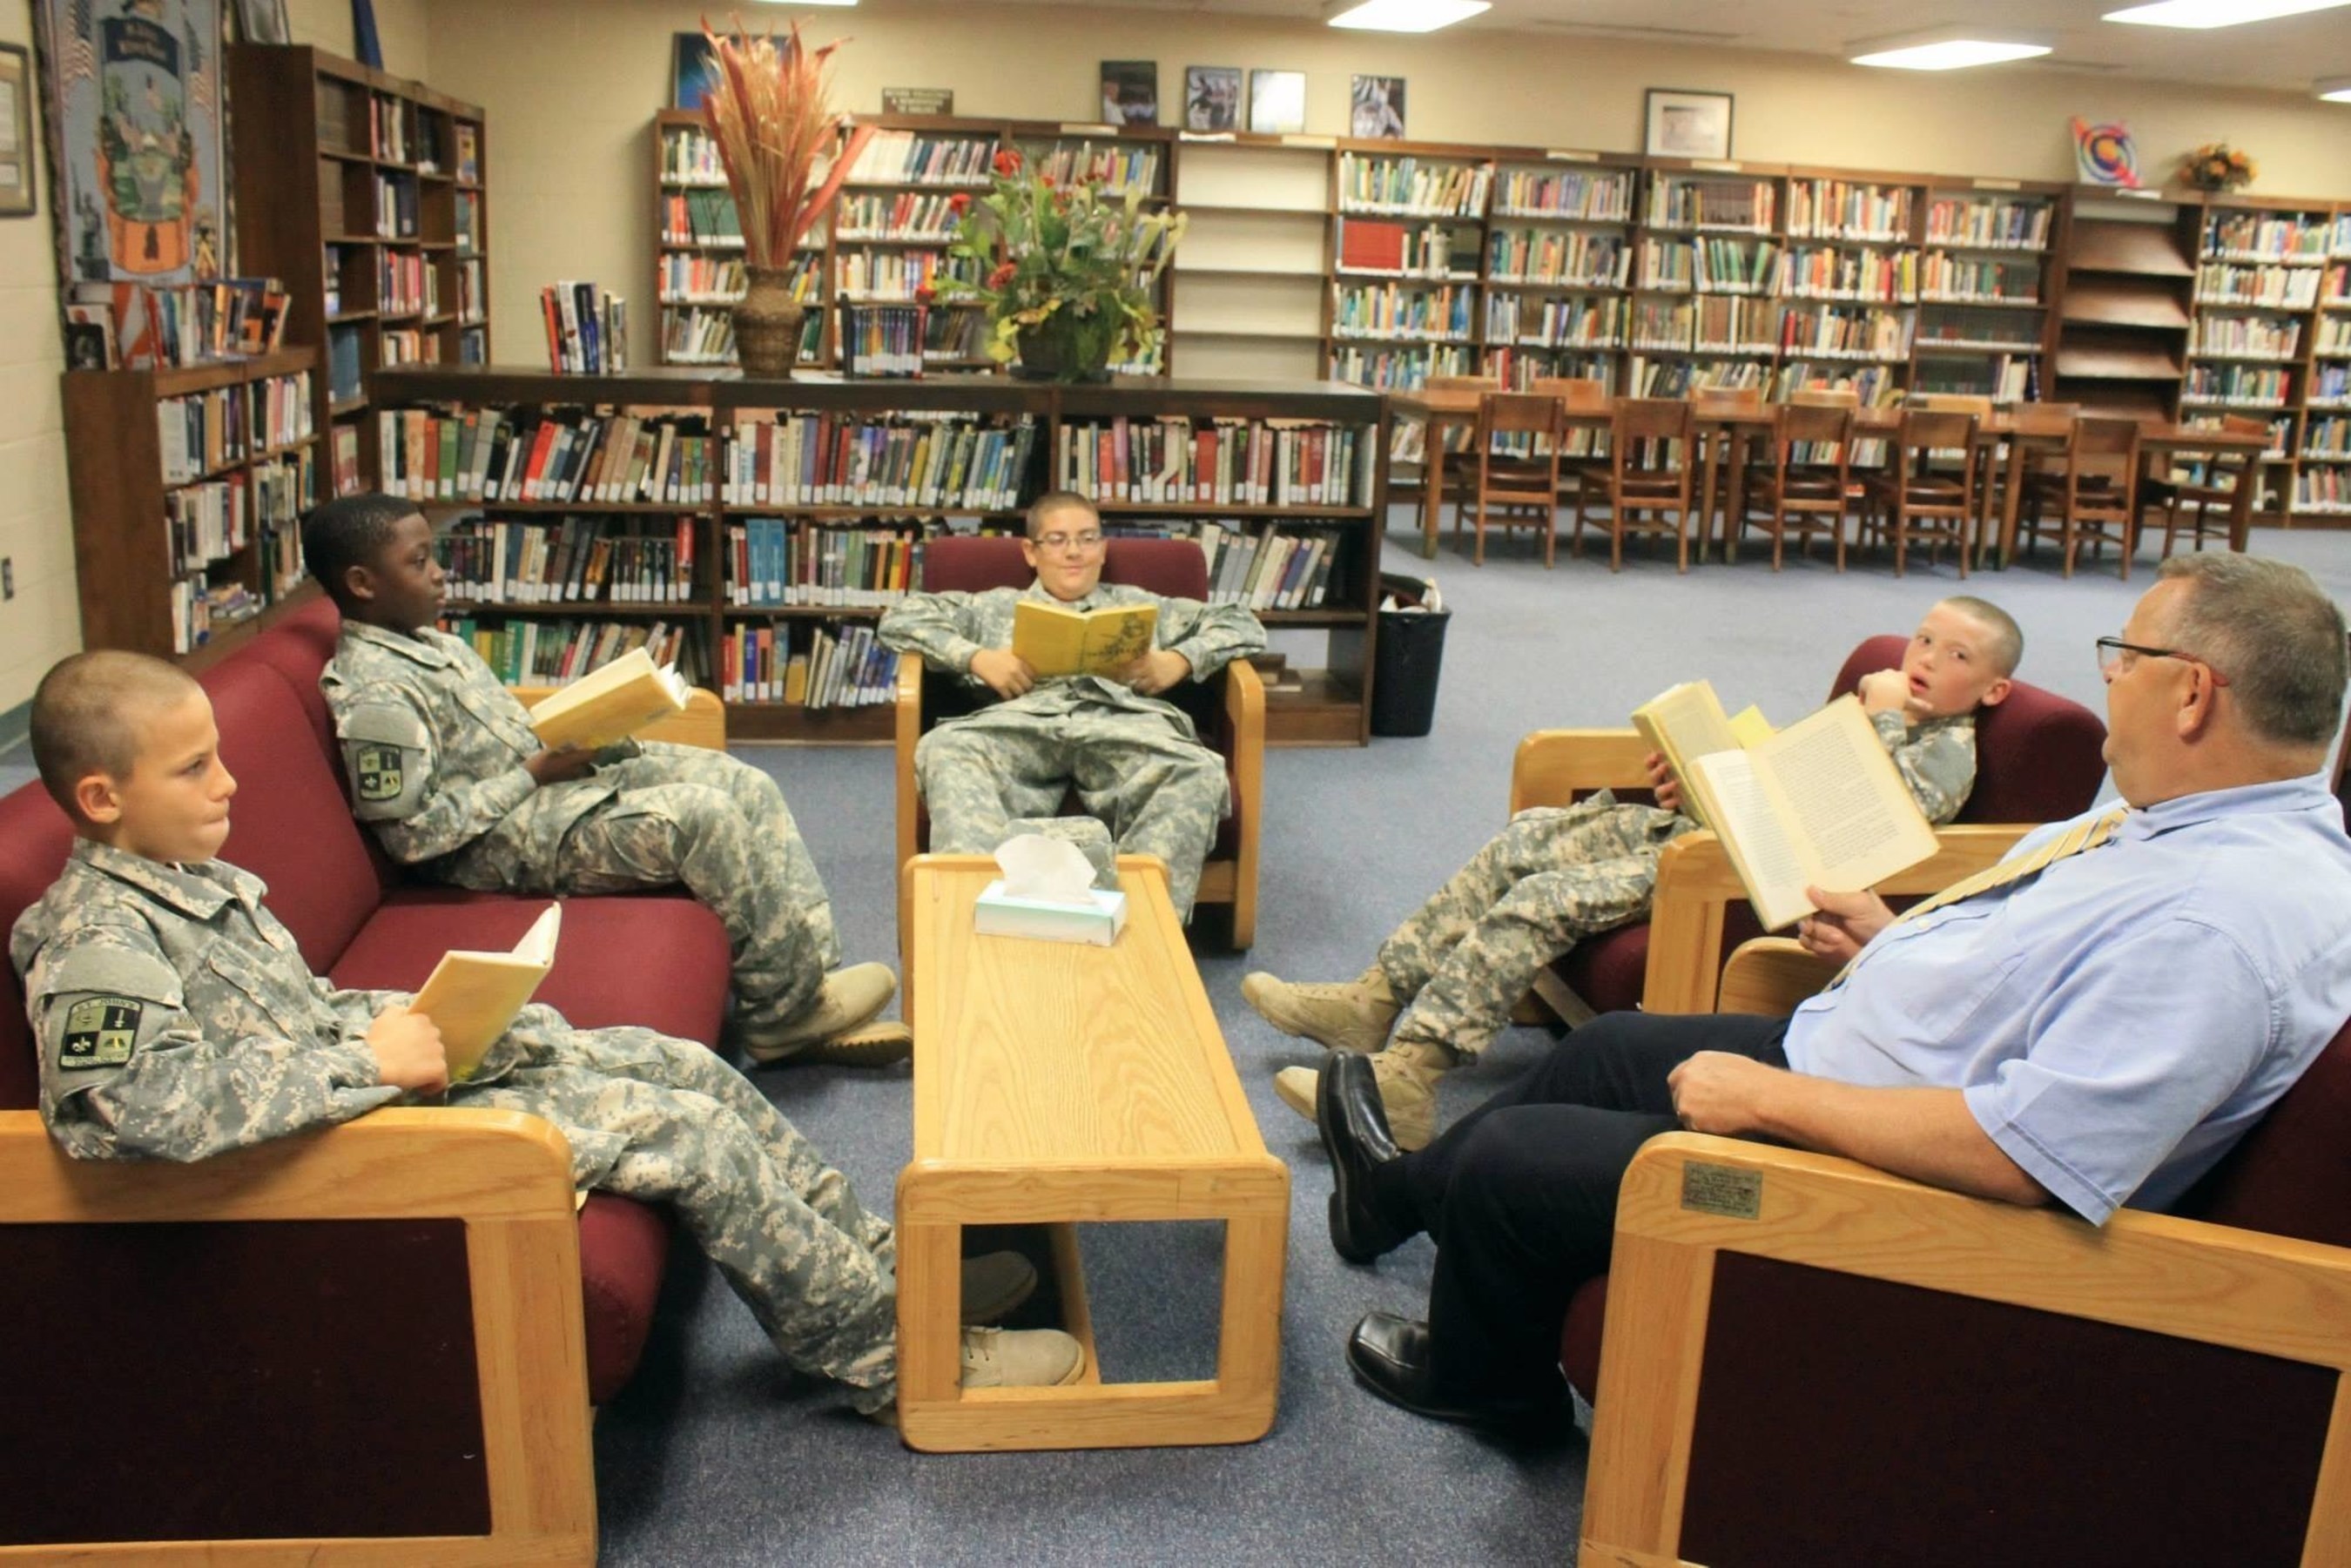 St. John's Military School 6th grade teacher Dan Jones, gets out from behind their desks whenever possible. Here, they read and discuss Old Yeller, the classic tale about a boy and his dog.